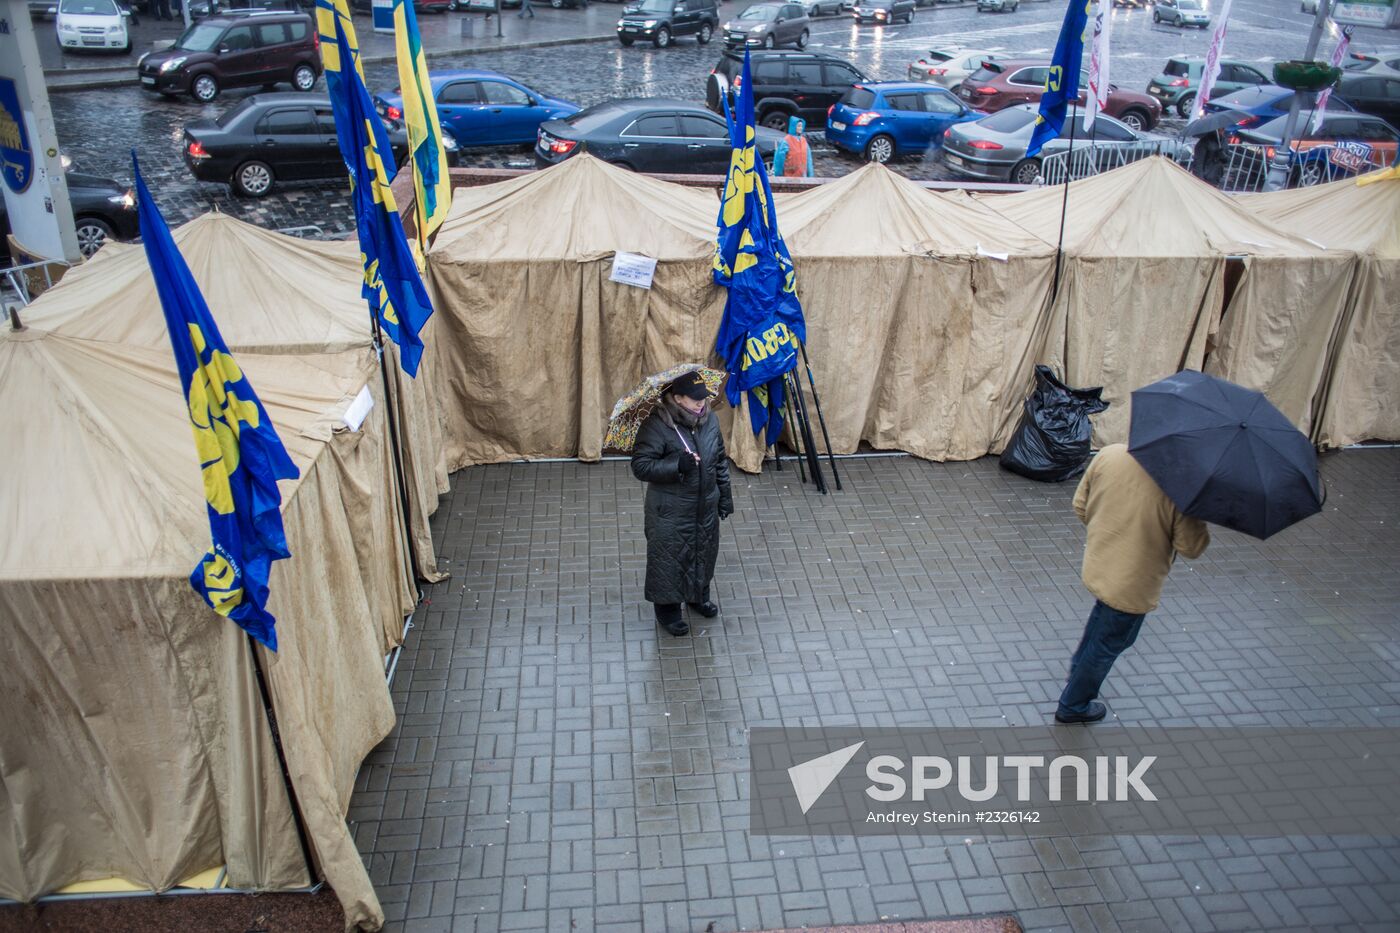 Tent camp set up by supporters of Ukraine's integration with EU